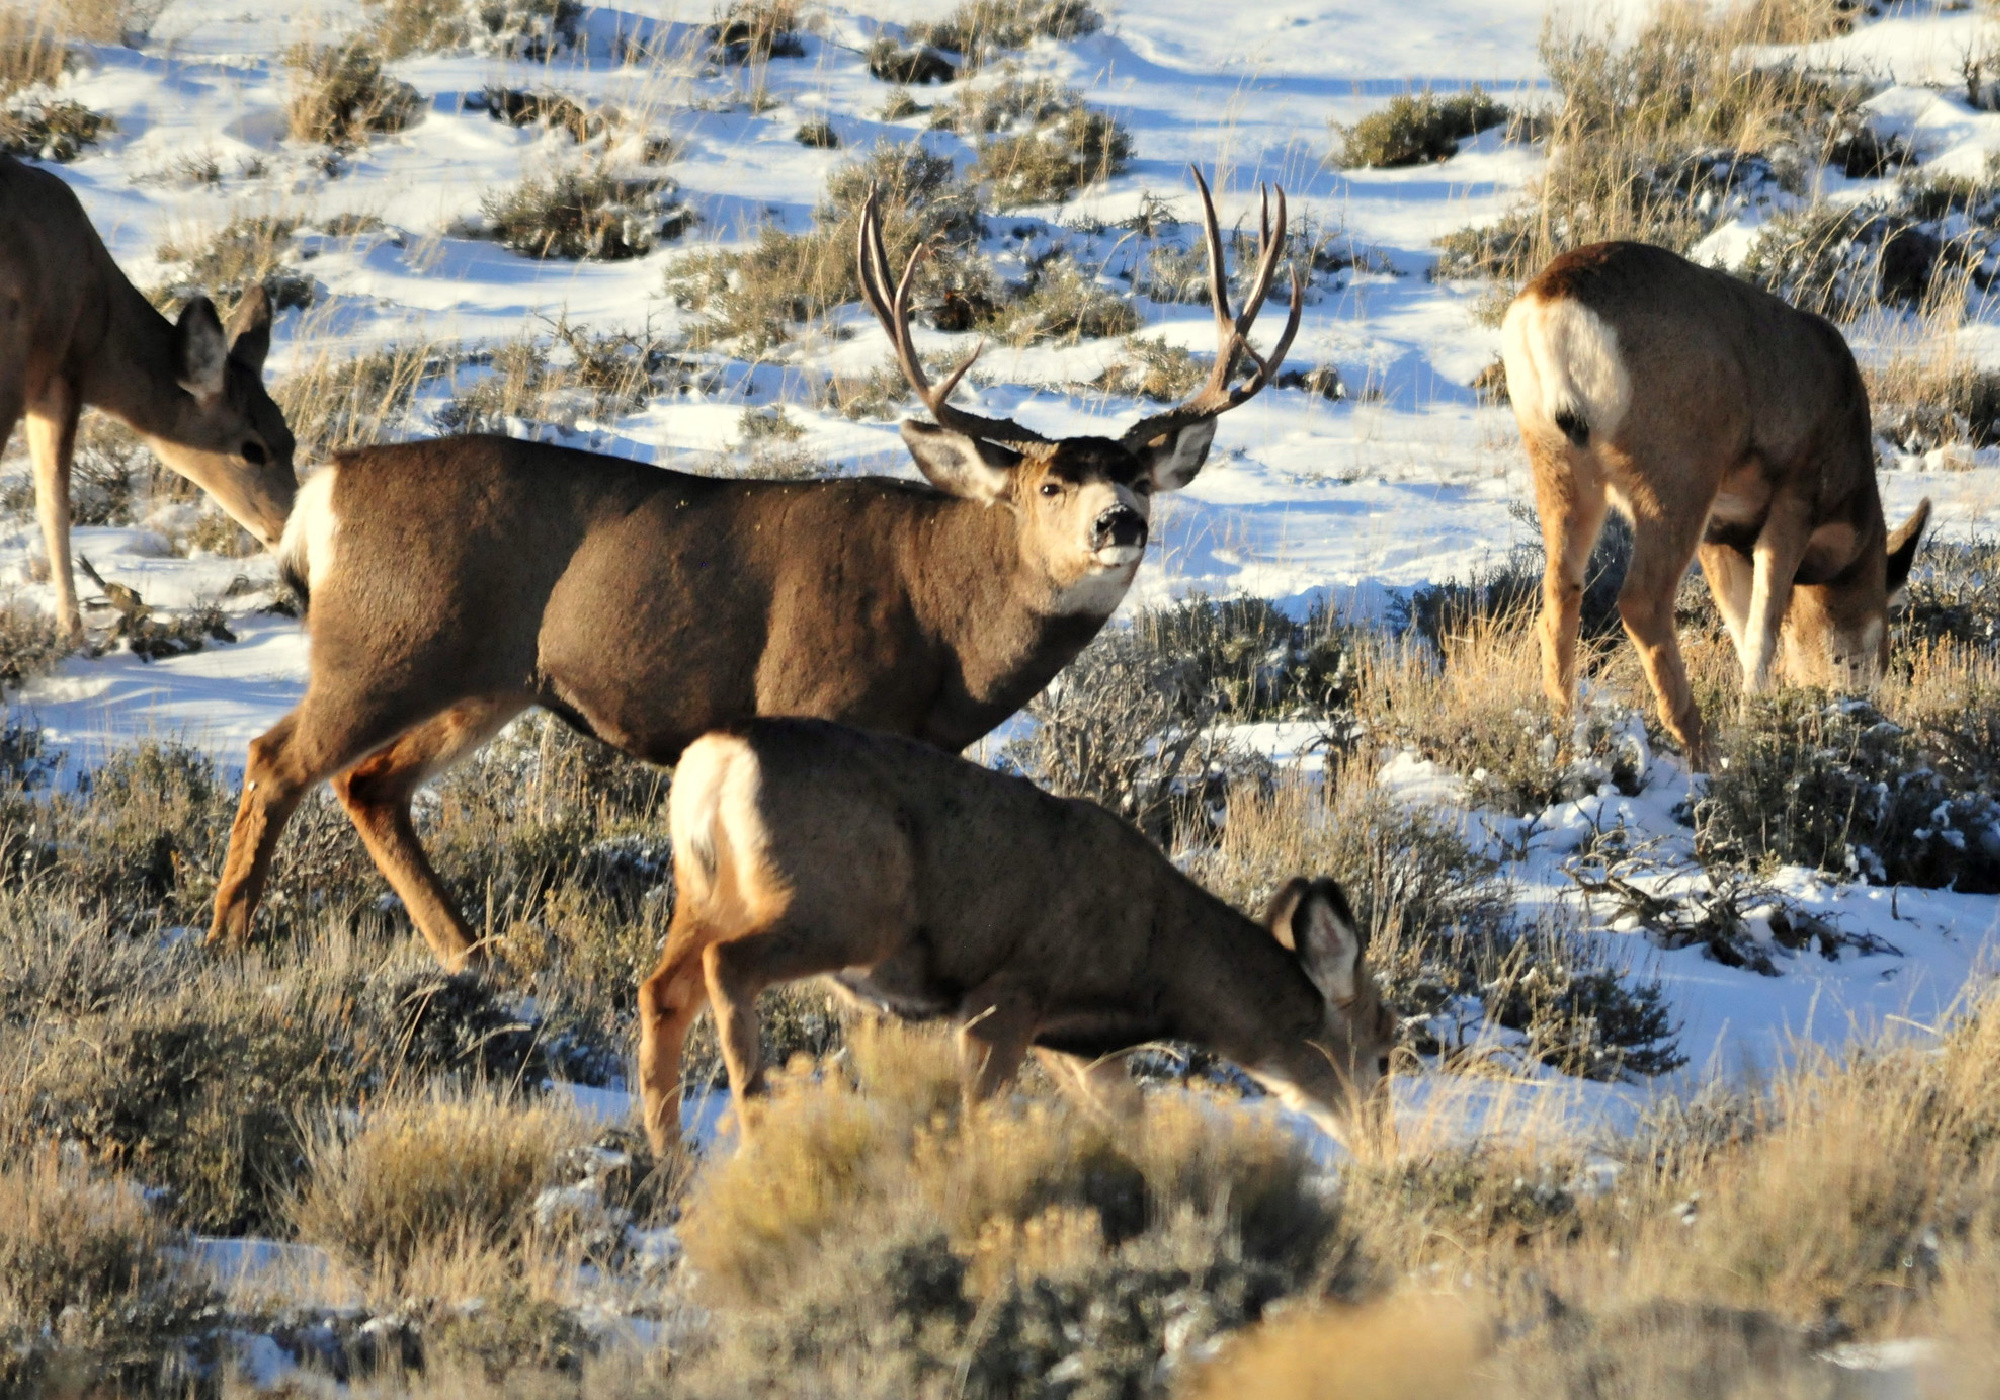 New Study Maps Mule Deer Migrations Without GPS Collars - swedbank.nl